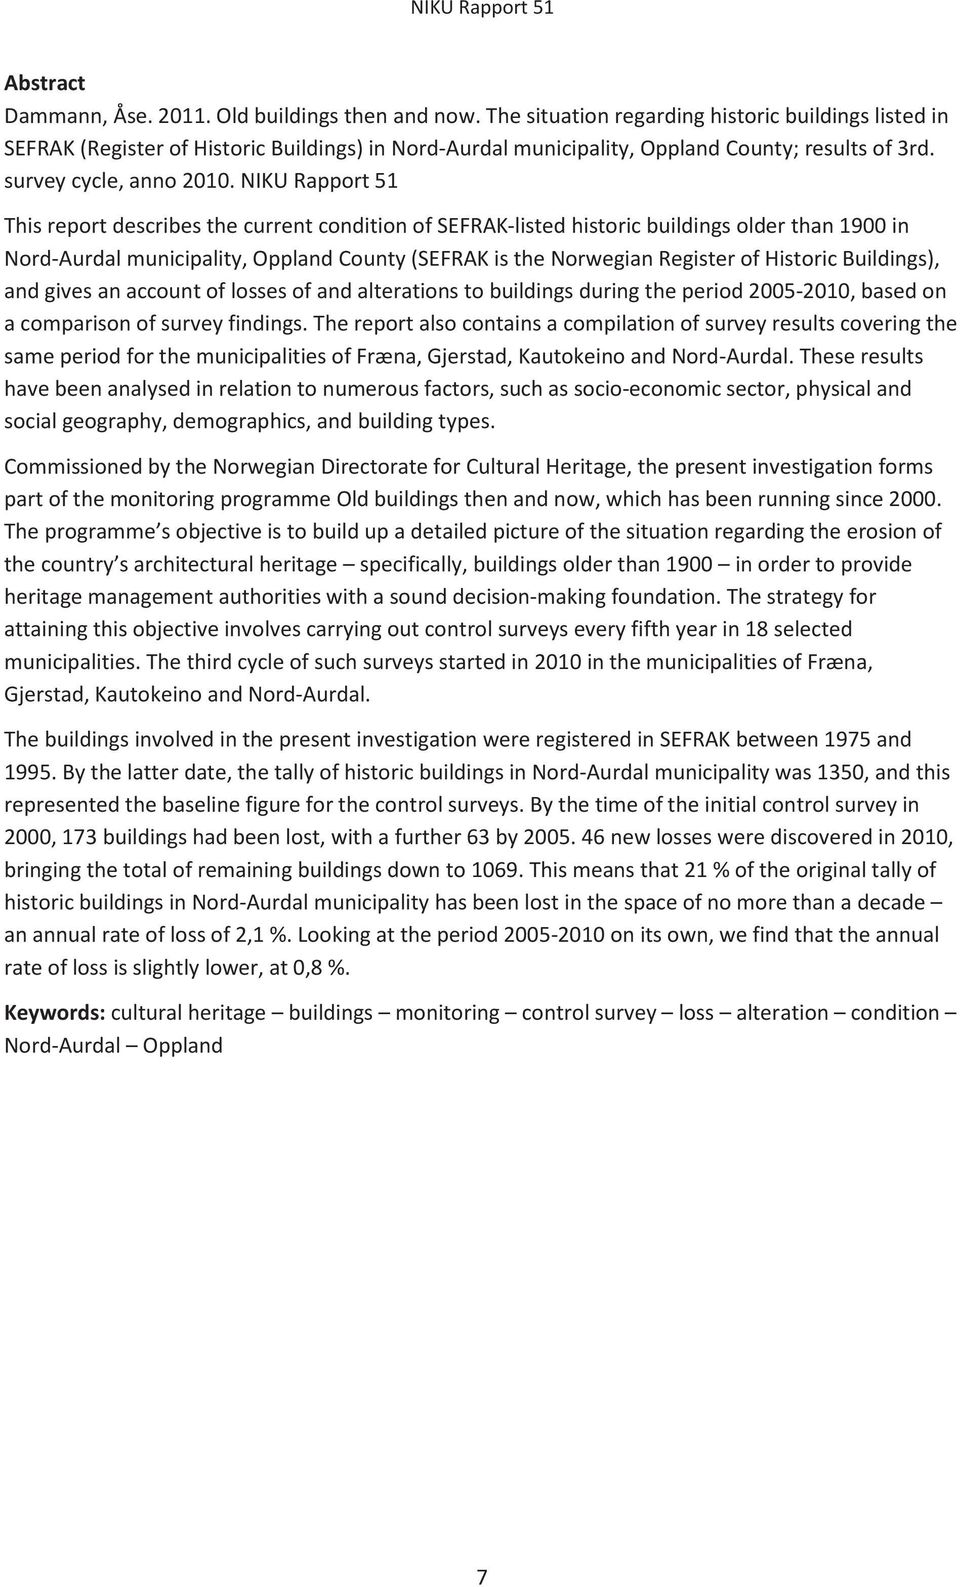 NIKU Rapport 51 This report describes the current condition of SEFRAK-listed historic buildings older than 1900 in Nord-Aurdal municipality, Oppland County (SEFRAK is the Norwegian Register of